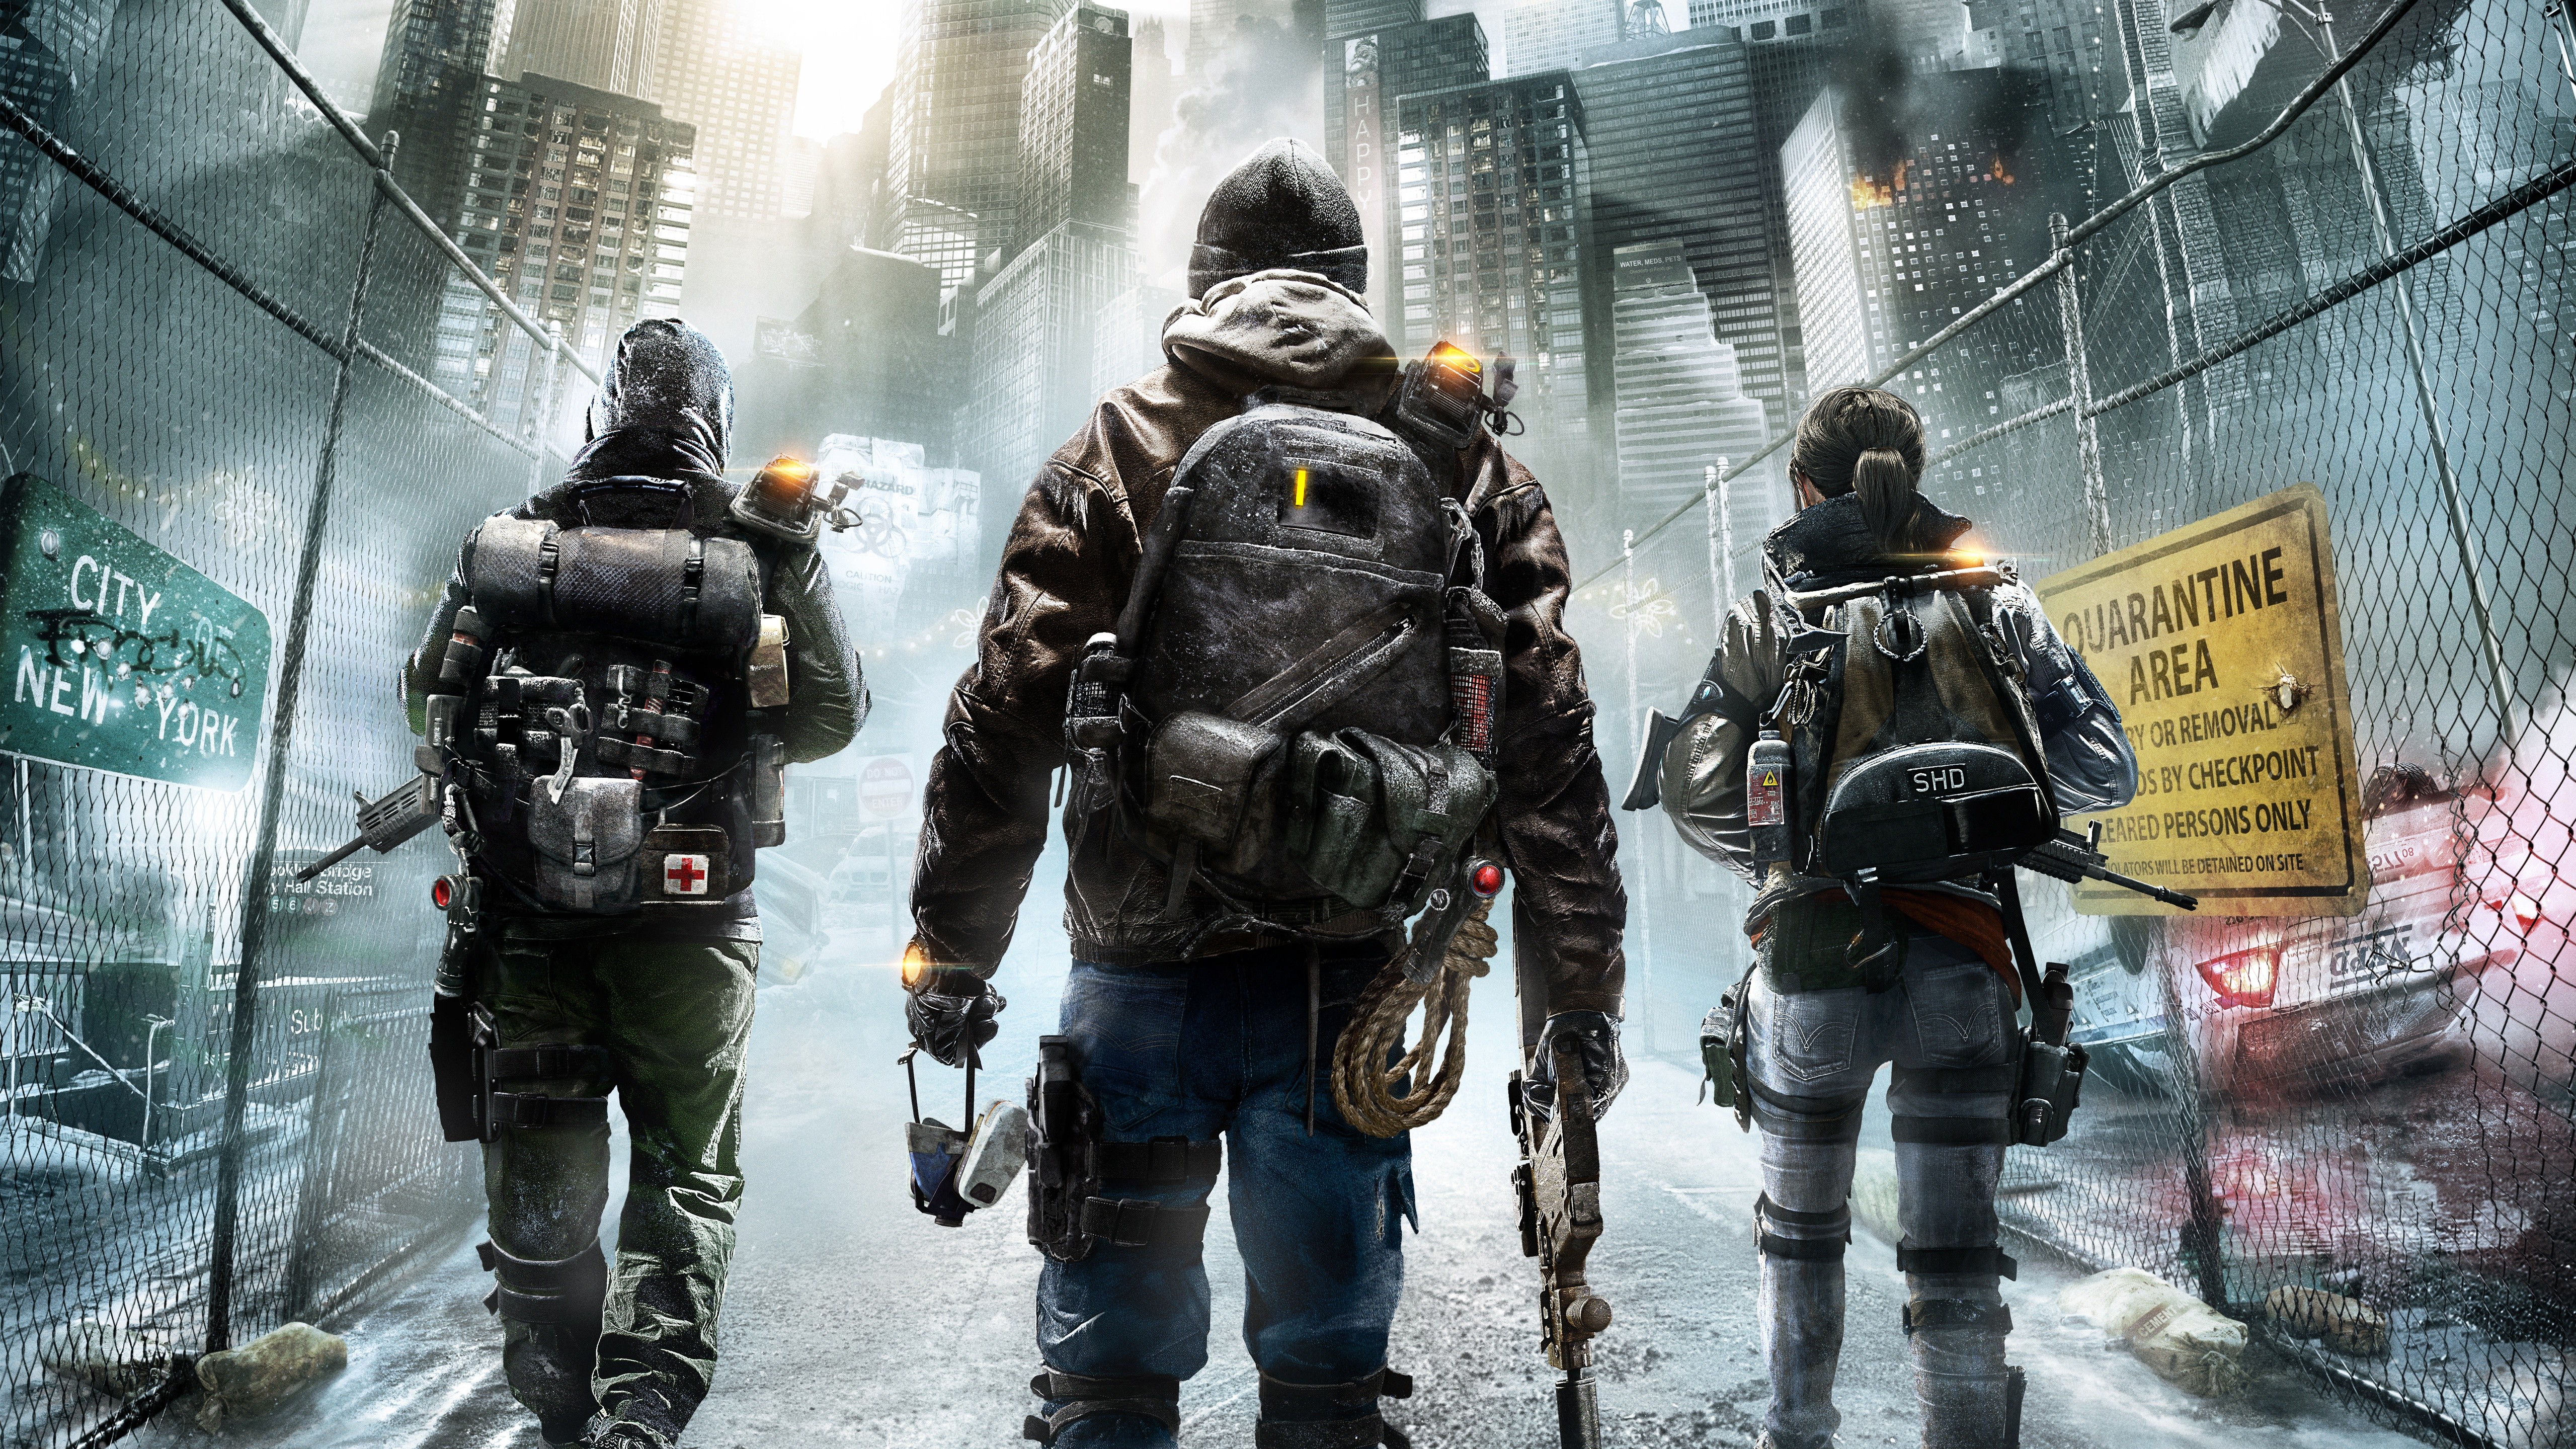 General 5120x2880 video games PC gaming Tom Clancy's The Division apocalyptic video game art